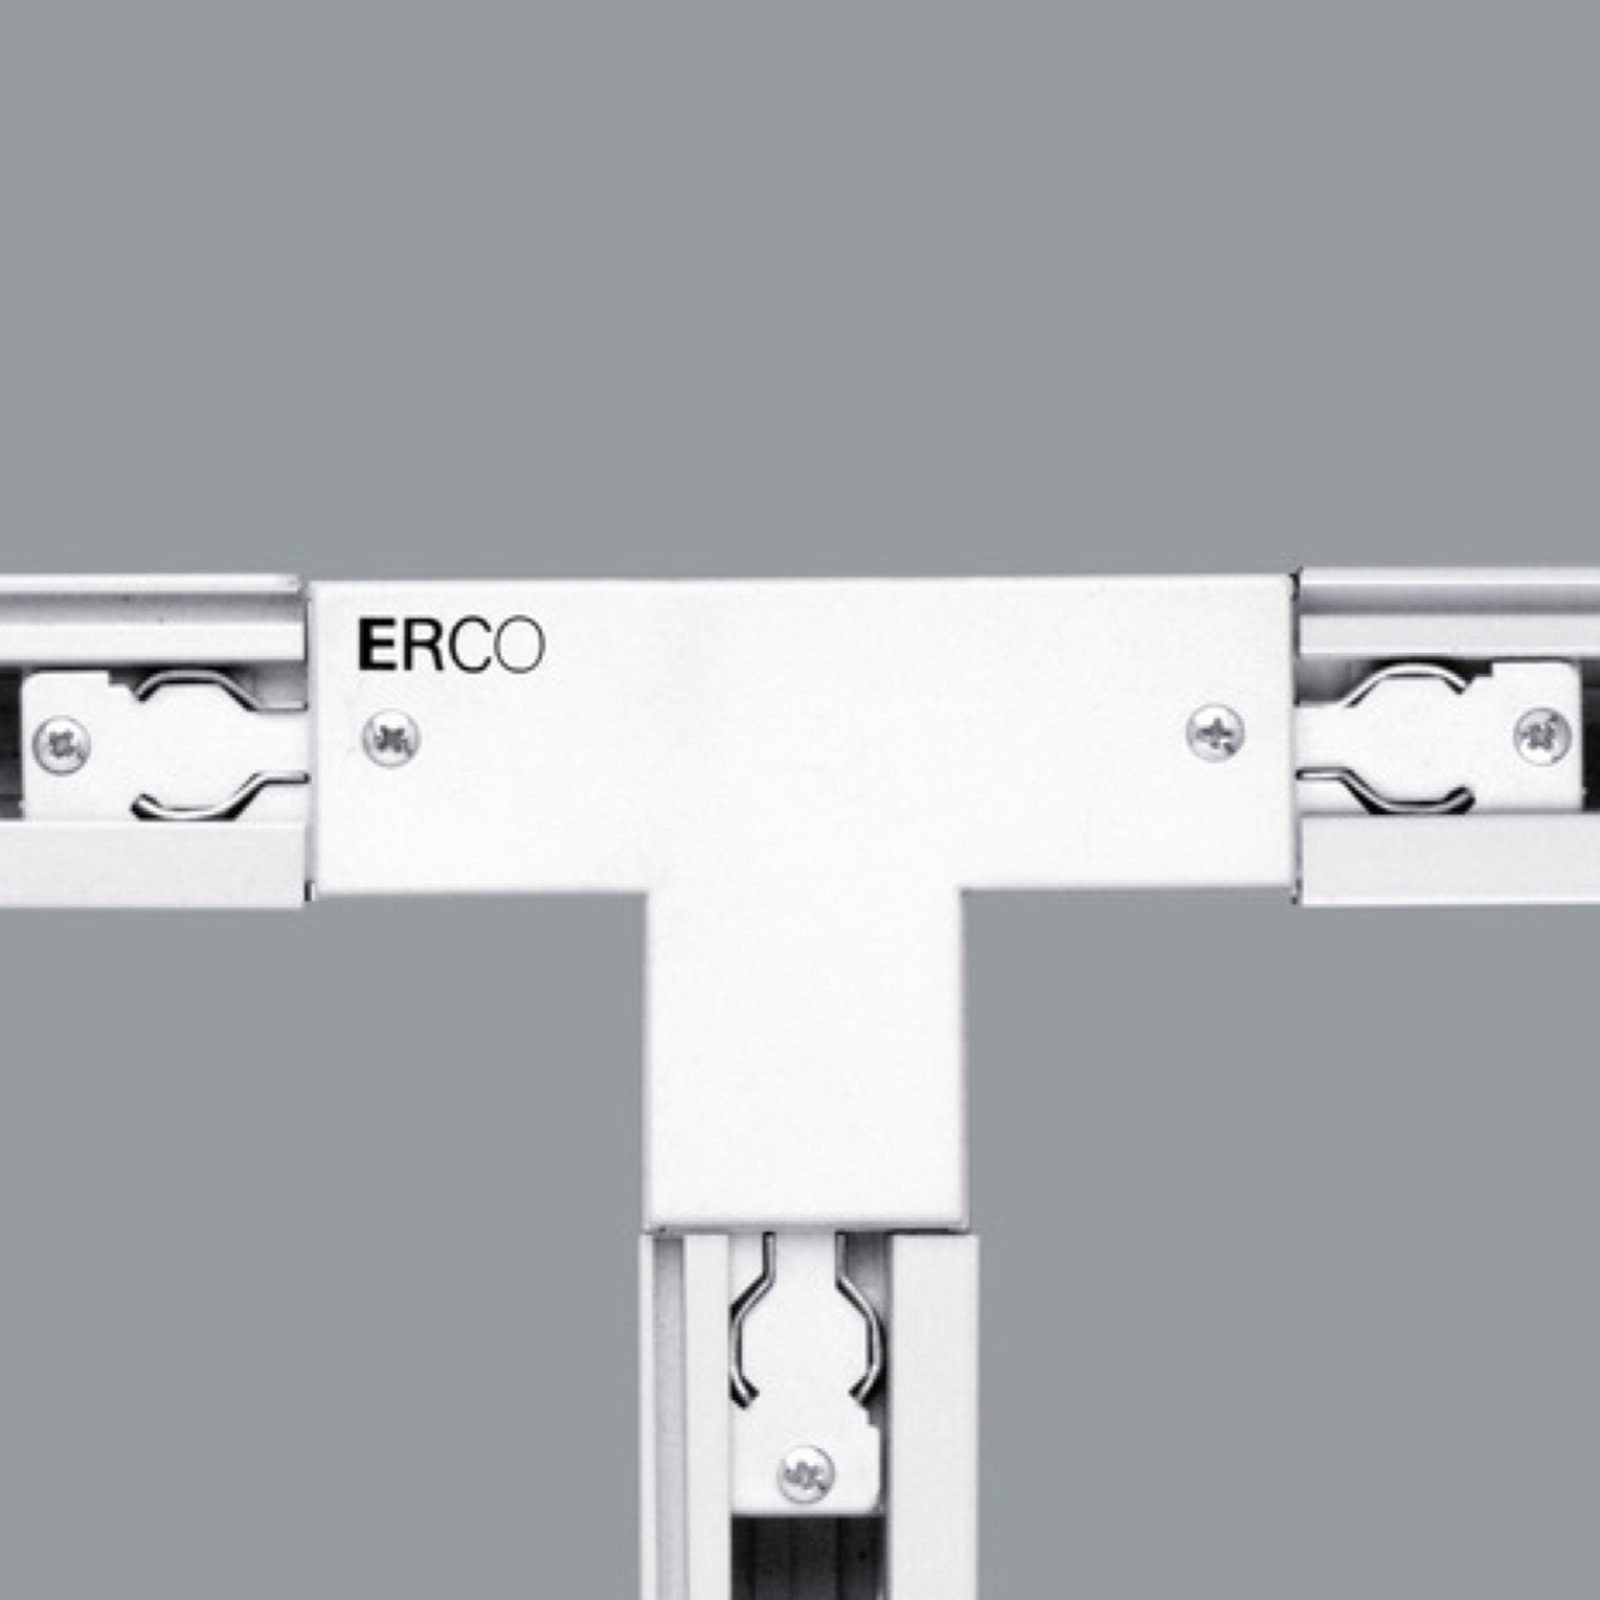 ERCO 3-circuit T connector, PE on the left, white